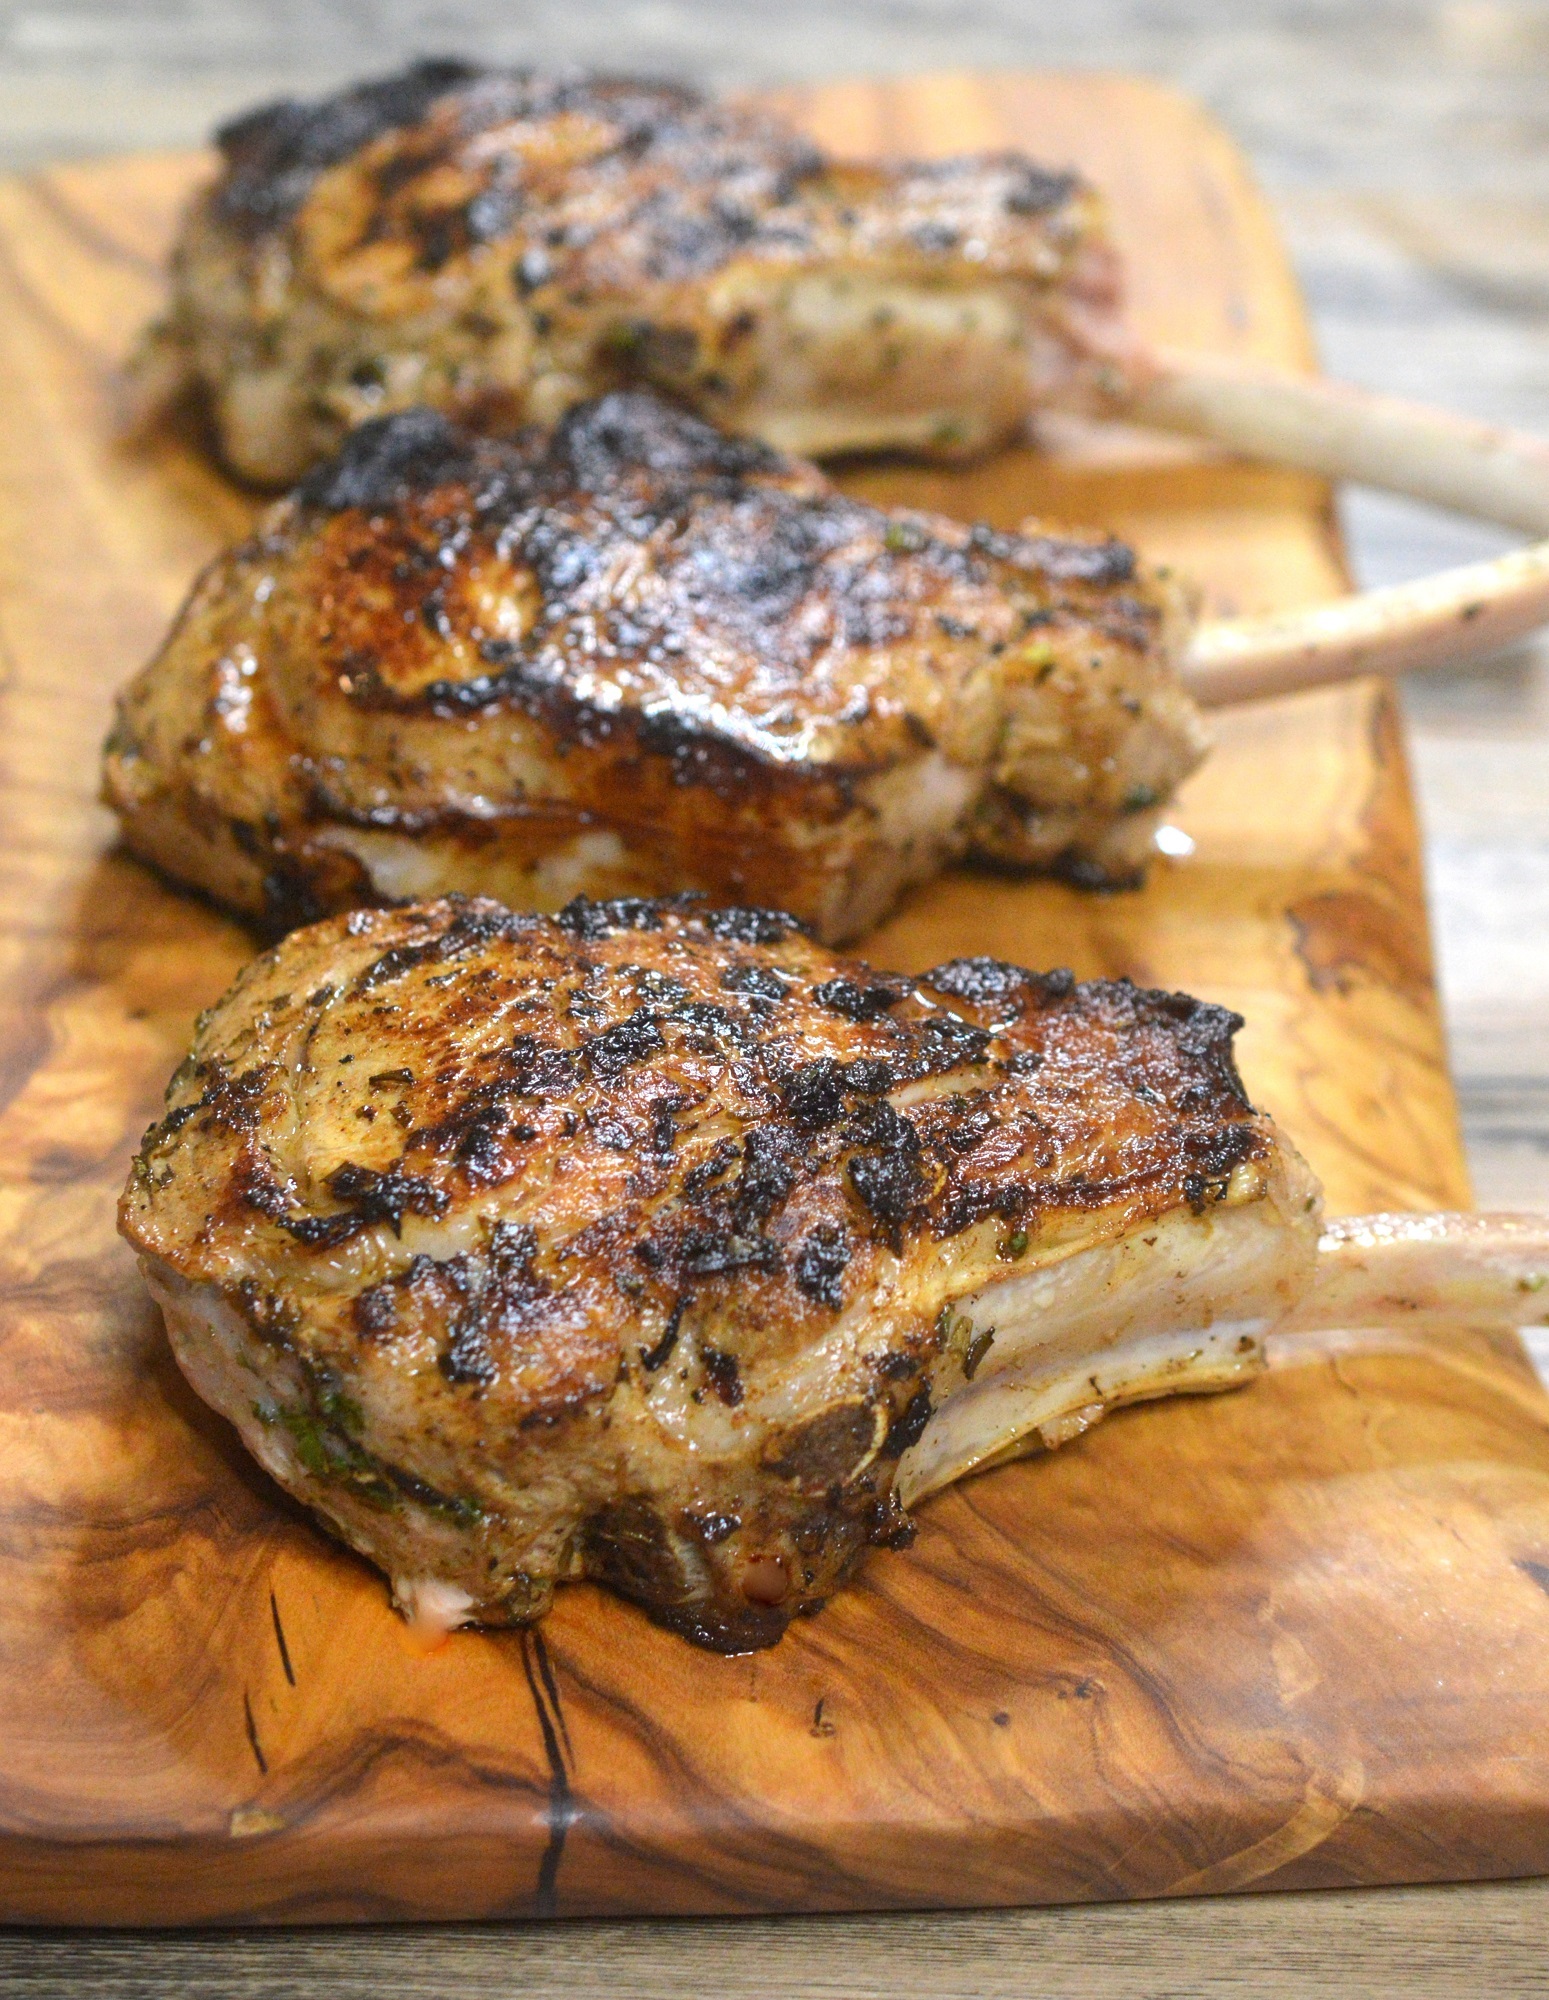 The BEST Grilled Veal Chops Recipe Shown Grilled Veal Chops on a wooden board.